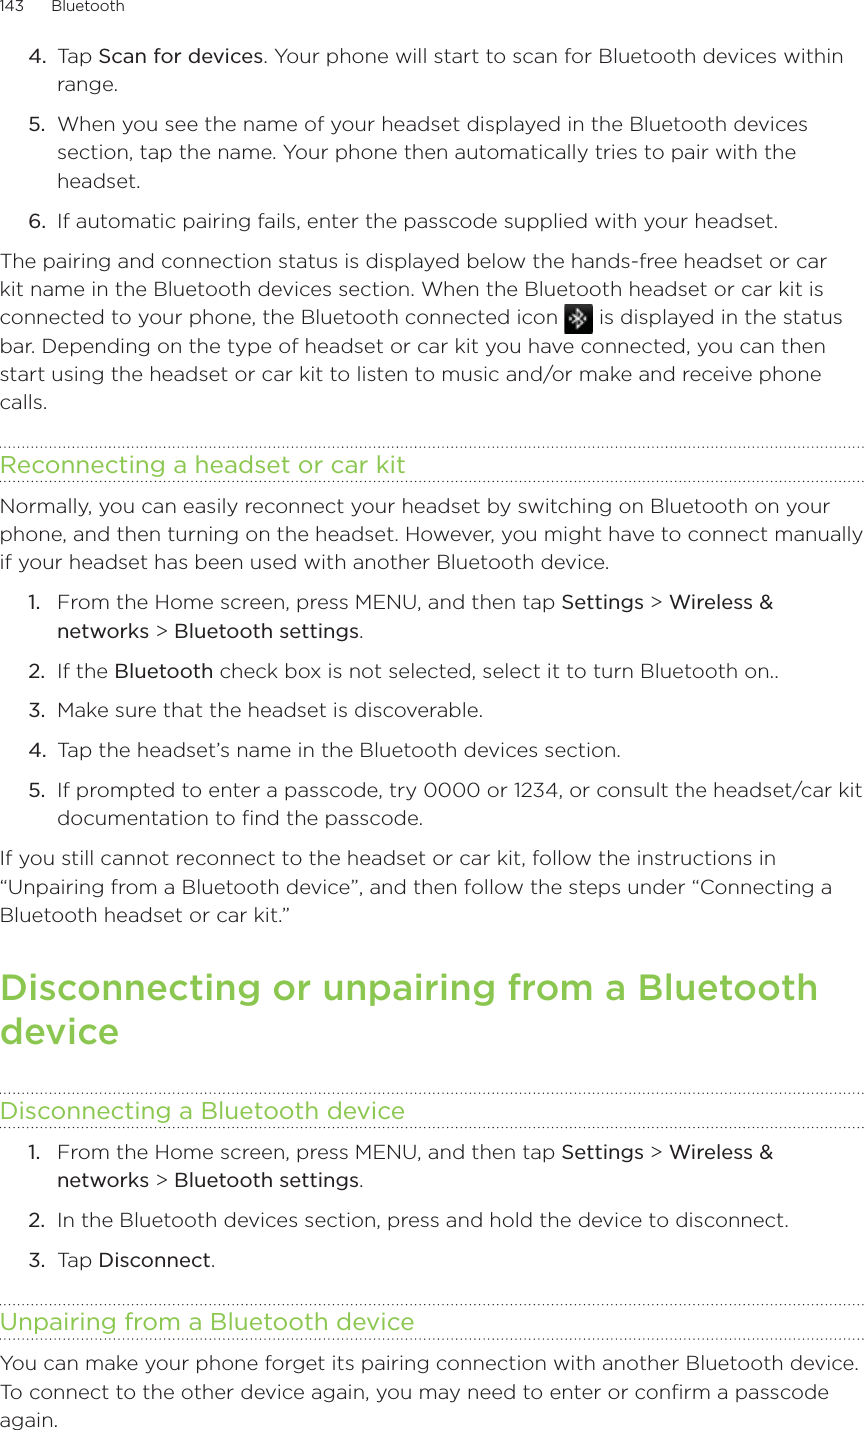 143      Bluetooth      4.  Tap Scan for devices. Your phone will start to scan for Bluetooth devices within range.5.  When you see the name of your headset displayed in the Bluetooth devices section, tap the name. Your phone then automatically tries to pair with the headset.6.  If automatic pairing fails, enter the passcode supplied with your headset.The pairing and connection status is displayed below the hands-free headset or car kit name in the Bluetooth devices section. When the Bluetooth headset or car kit is connected to your phone, the Bluetooth connected icon   is displayed in the status bar. Depending on the type of headset or car kit you have connected, you can then start using the headset or car kit to listen to music and/or make and receive phone calls.Reconnecting a headset or car kitNormally, you can easily reconnect your headset by switching on Bluetooth on your phone, and then turning on the headset. However, you might have to connect manually if your headset has been used with another Bluetooth device.From the Home screen, press MENU, and then tap Settings &gt; Wireless &amp; networks &gt; Bluetooth settings.If the Bluetooth check box is not selected, select it to turn Bluetooth on..Make sure that the headset is discoverable.Tap the headset’s name in the Bluetooth devices section.If prompted to enter a passcode, try 0000 or 1234, or consult the headset/car kit documentation to find the passcode.If you still cannot reconnect to the headset or car kit, follow the instructions in “Unpairing from a Bluetooth device”, and then follow the steps under “Connecting a Bluetooth headset or car kit.”Disconnecting or unpairing from a Bluetooth deviceDisconnecting a Bluetooth deviceFrom the Home screen, press MENU, and then tap Settings &gt; Wireless &amp; networks &gt; Bluetooth settings.In the Bluetooth devices section, press and hold the device to disconnect.Tap Disconnect.Unpairing from a Bluetooth deviceYou can make your phone forget its pairing connection with another Bluetooth device.  To connect to the other device again, you may need to enter or confirm a passcode again.1.2.3.4.5.1.2.3.